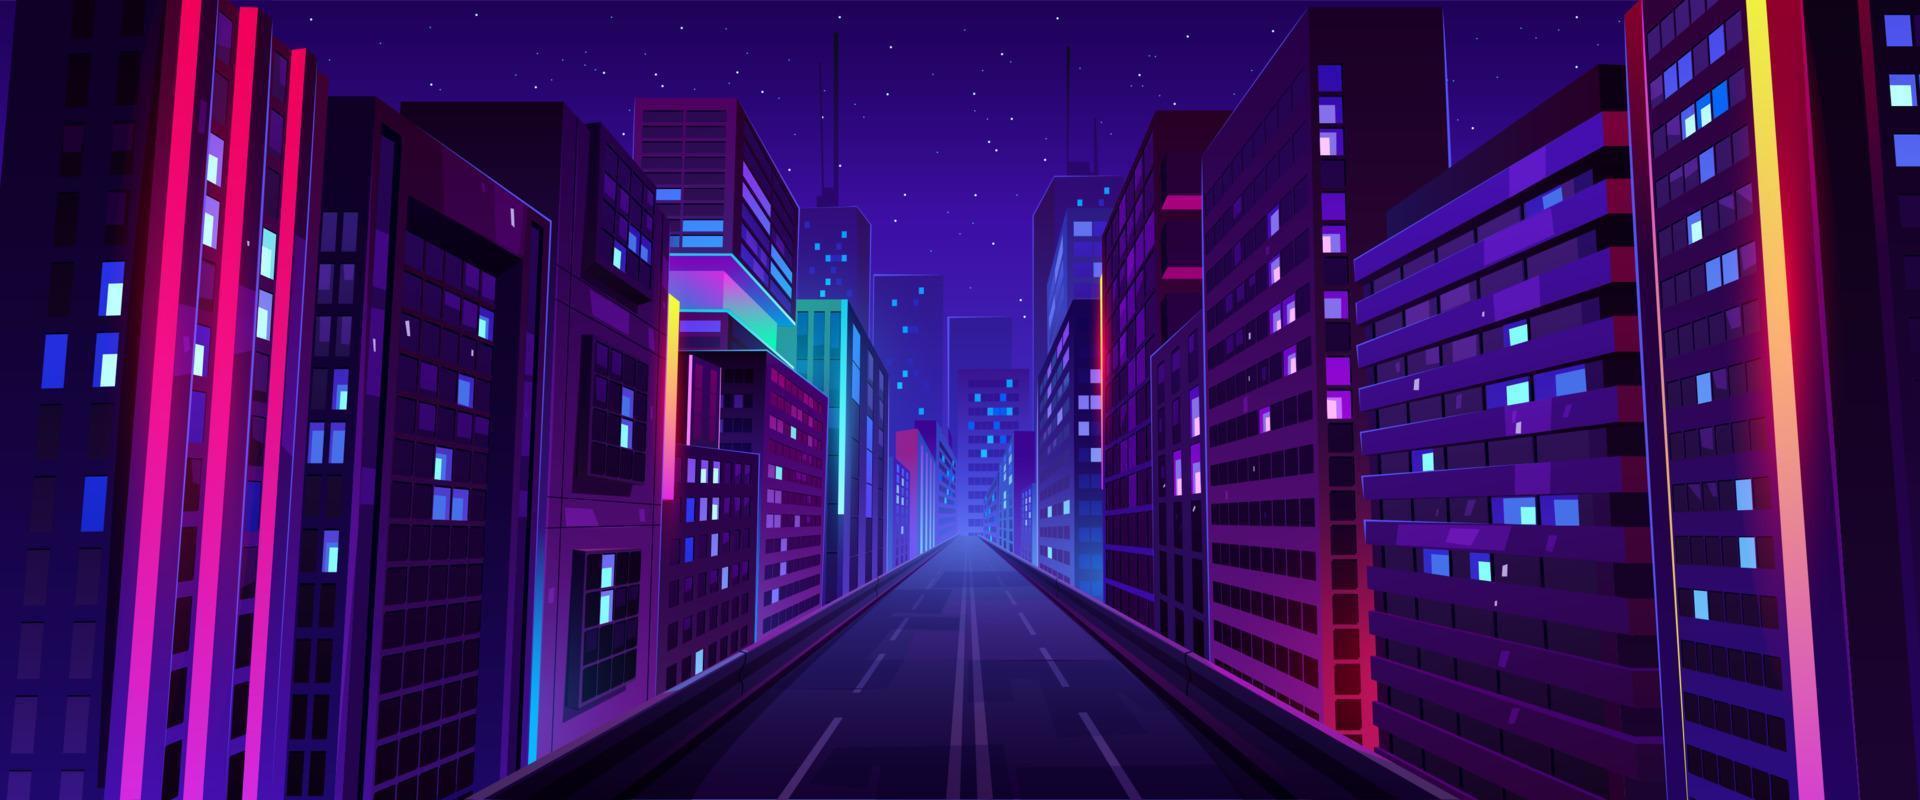 City night street, road and houses with neon ligth vector